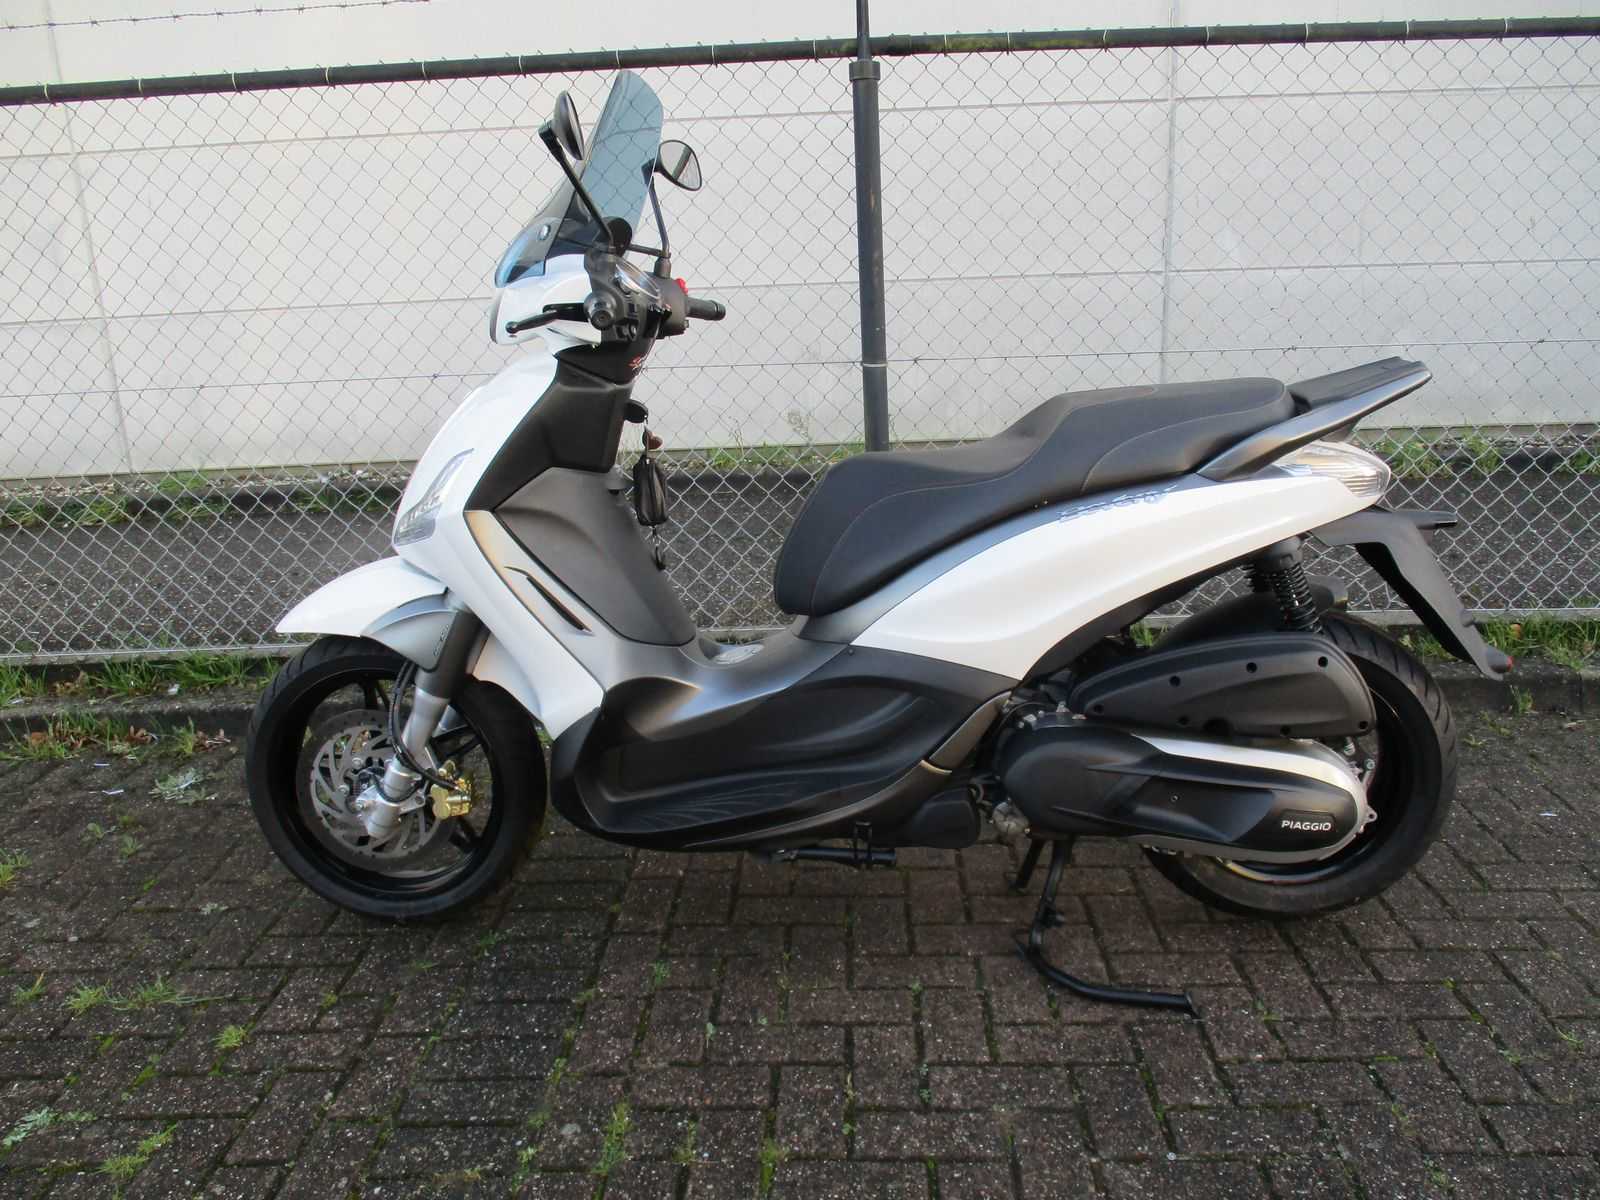 Piaggio Beverly - motor scooter - 350 Sport Touring ABS/ASR - Motorcycle